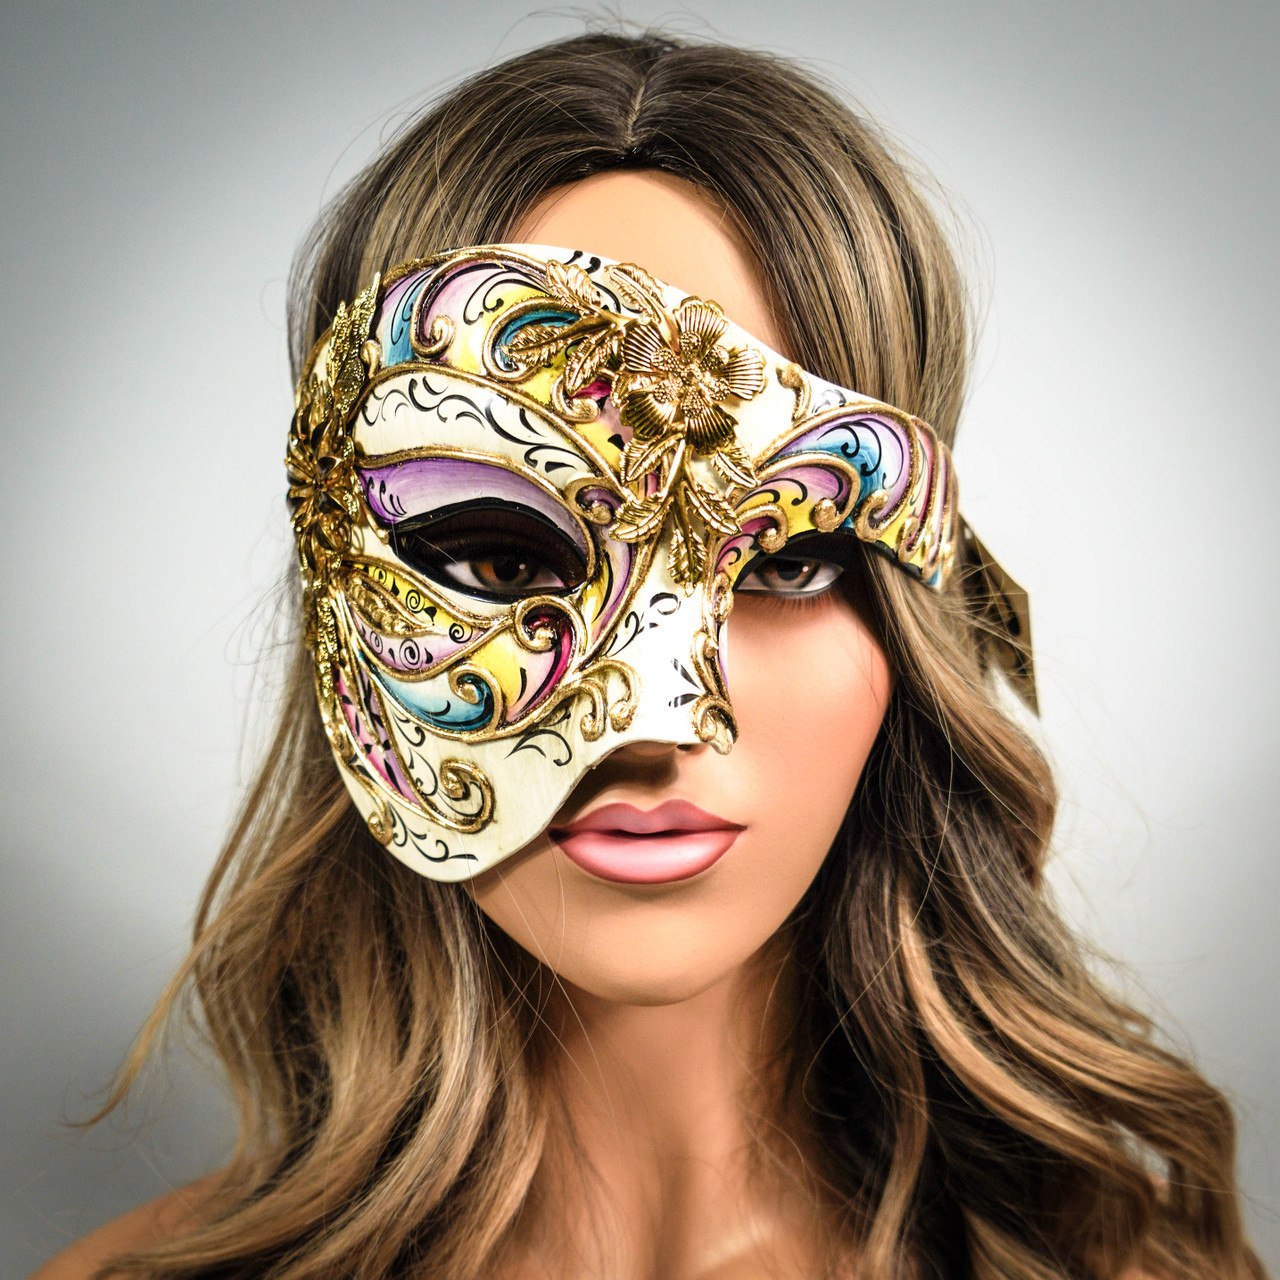 NEW Masquerade Mask for Men Party Masks USA Free Shipping Site-wide